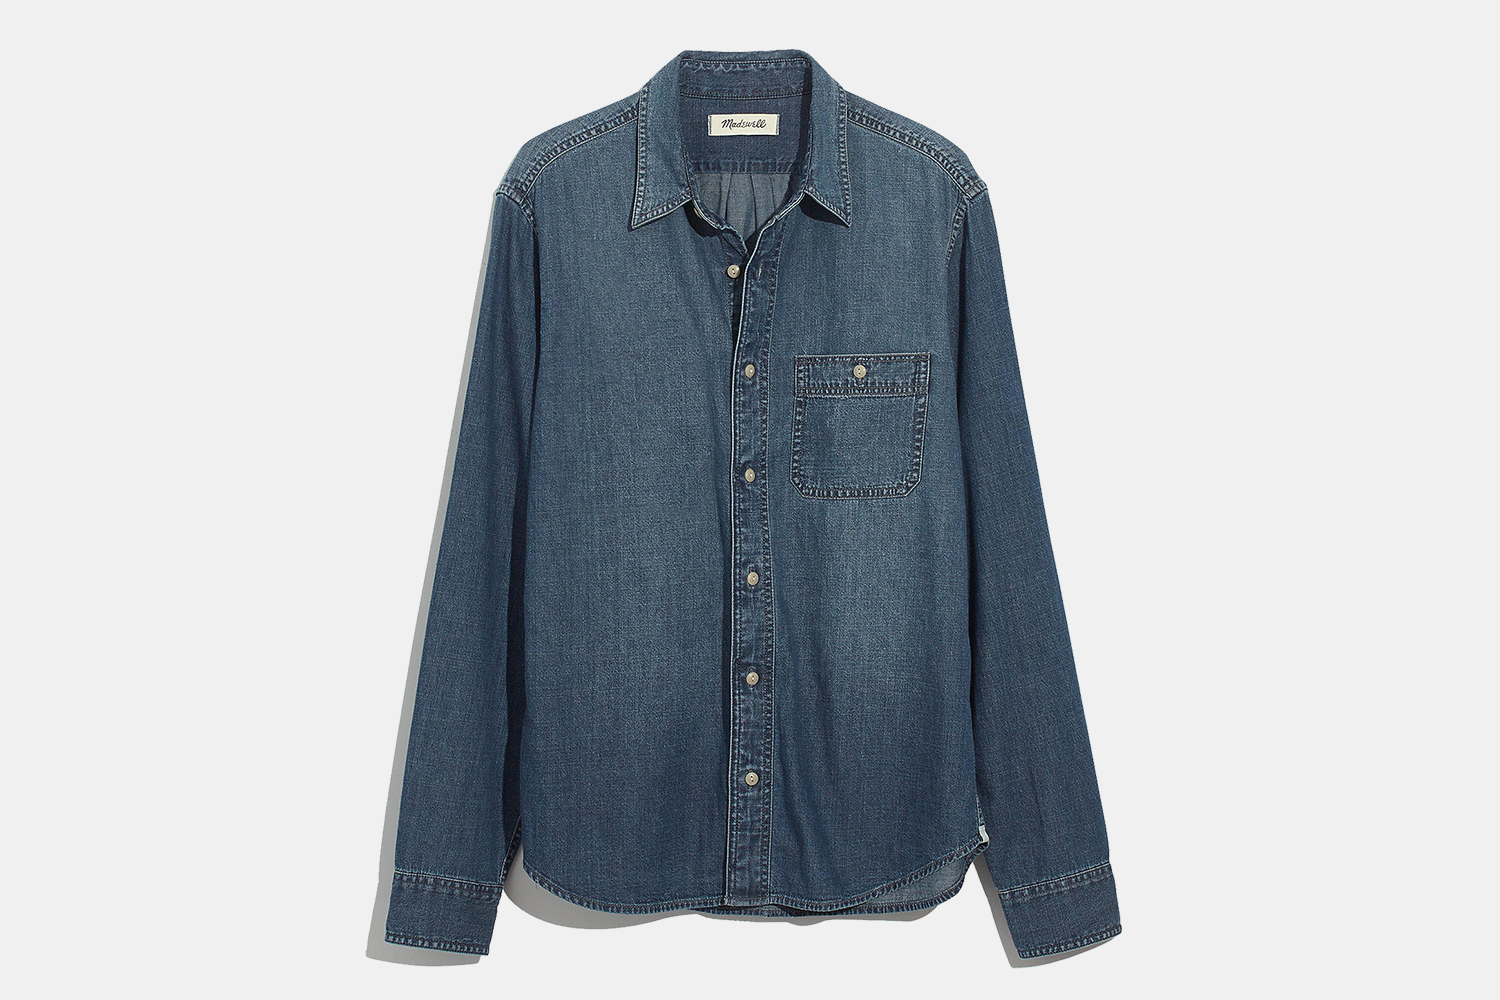 Madewell Men Denim Button-Down Shirt in Newhall Wash